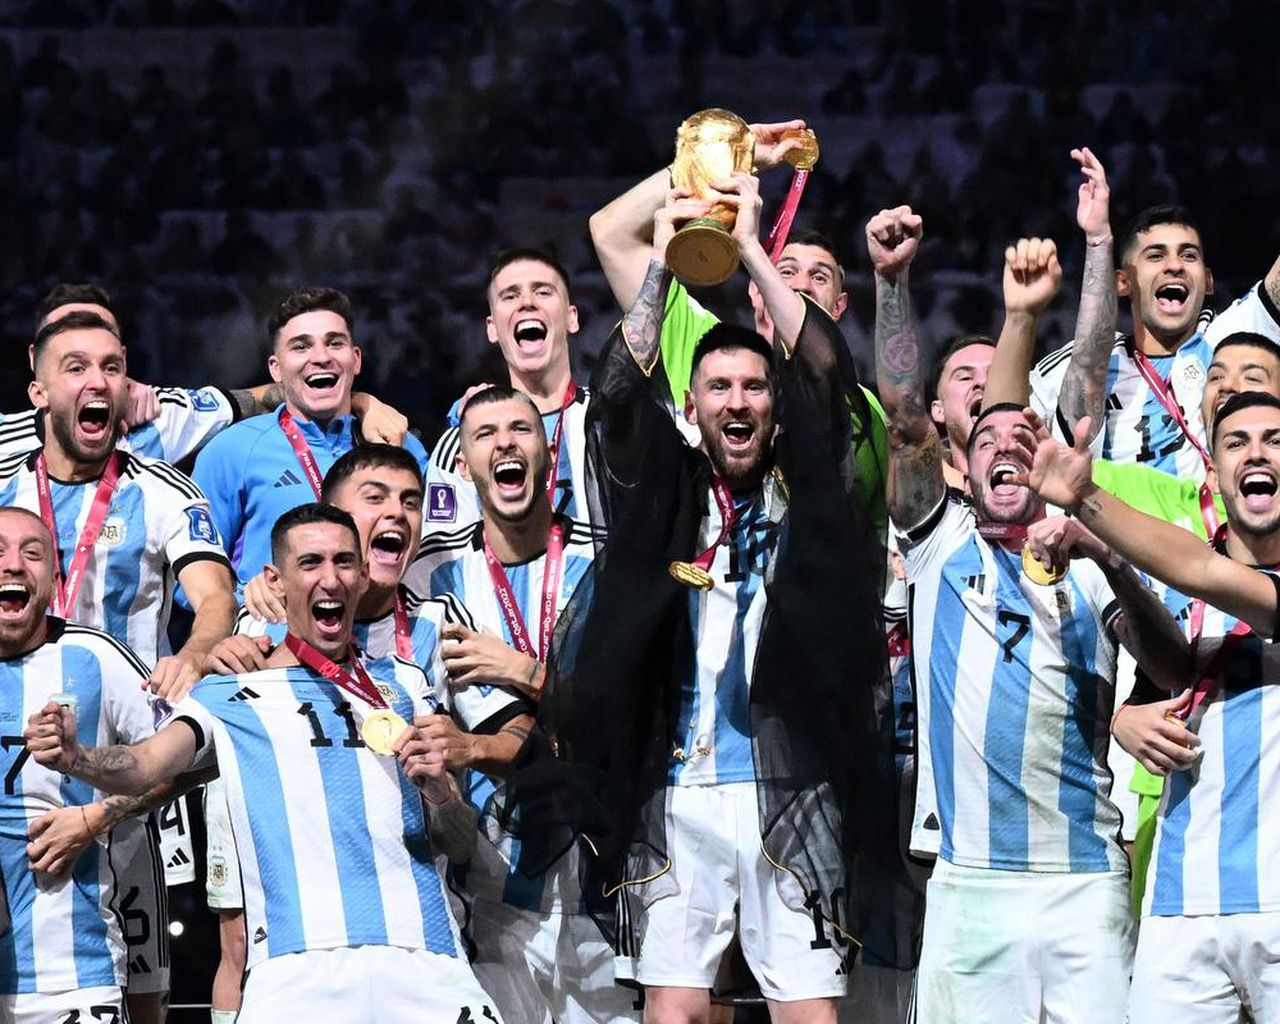 World Cup final was Messi, Mbappé, and magnificent